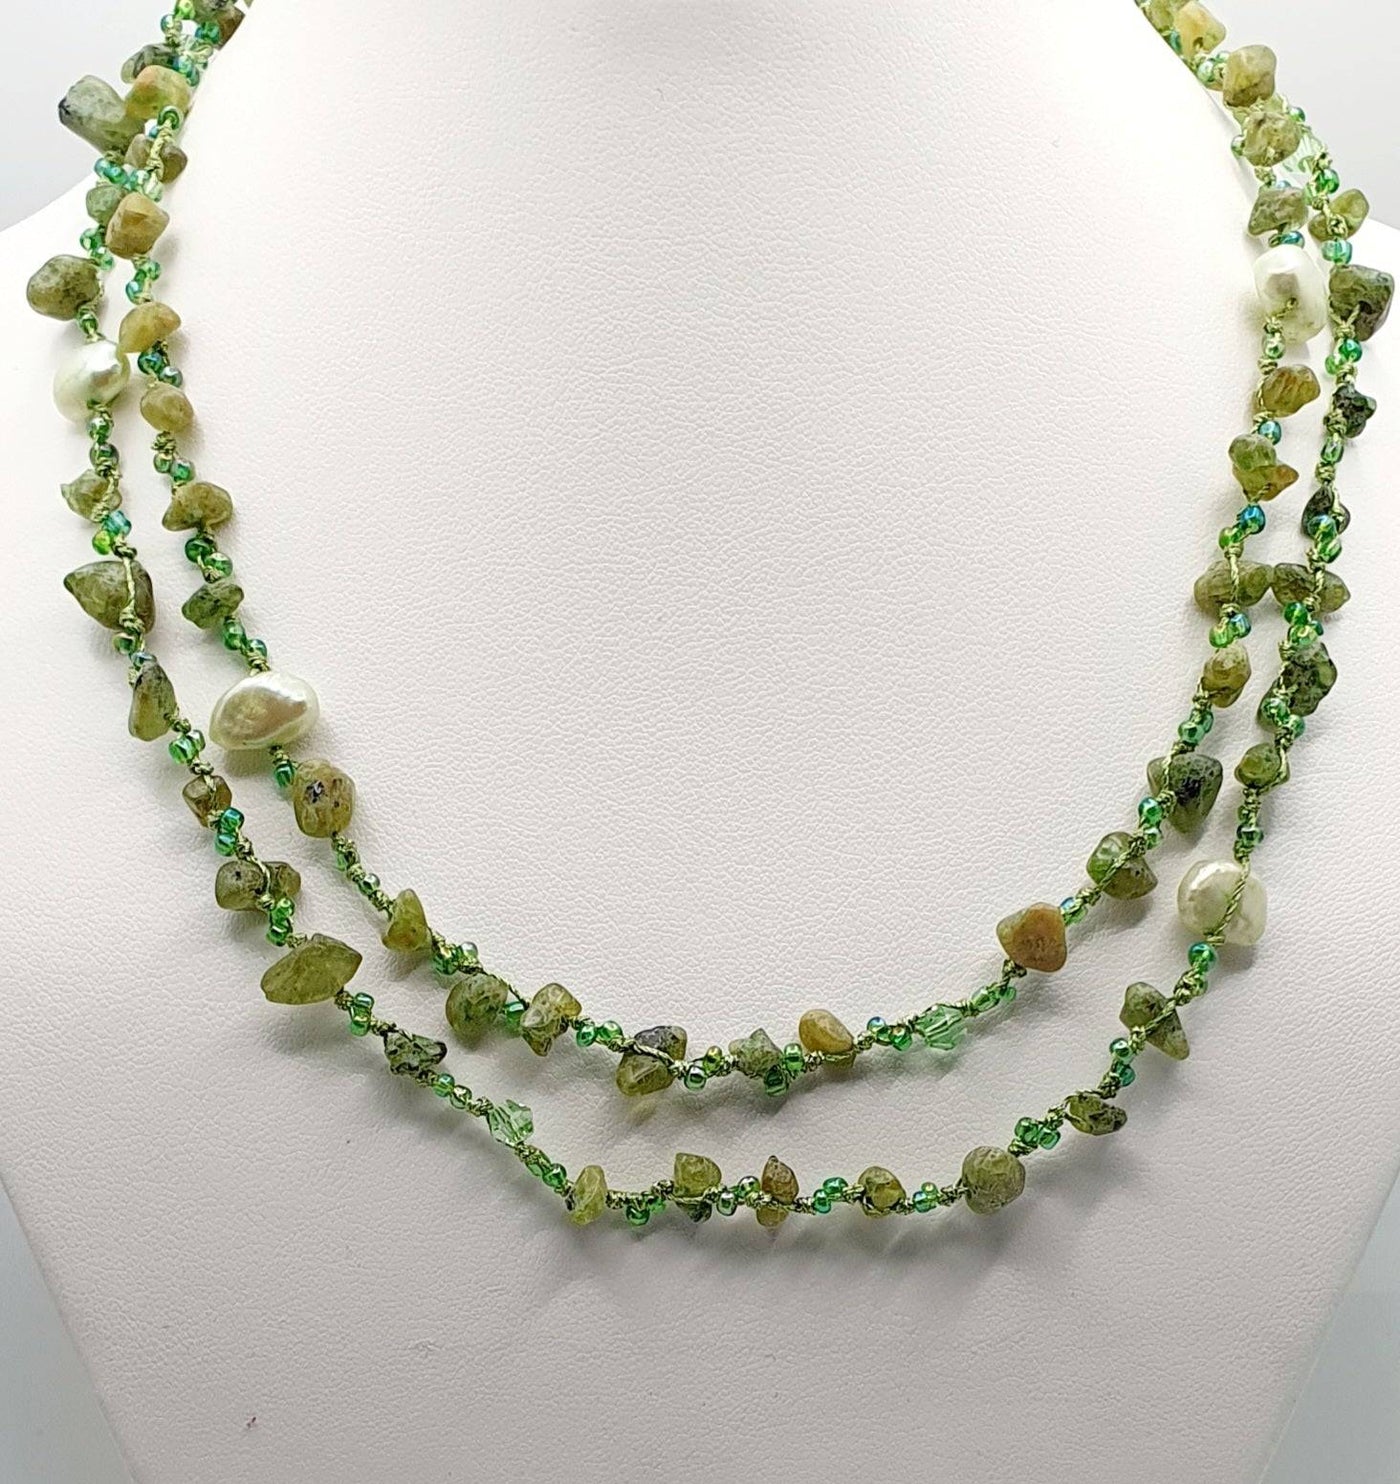 Japanese Silk Cord Necklace With Freshwater Pearls & Peridot155cm